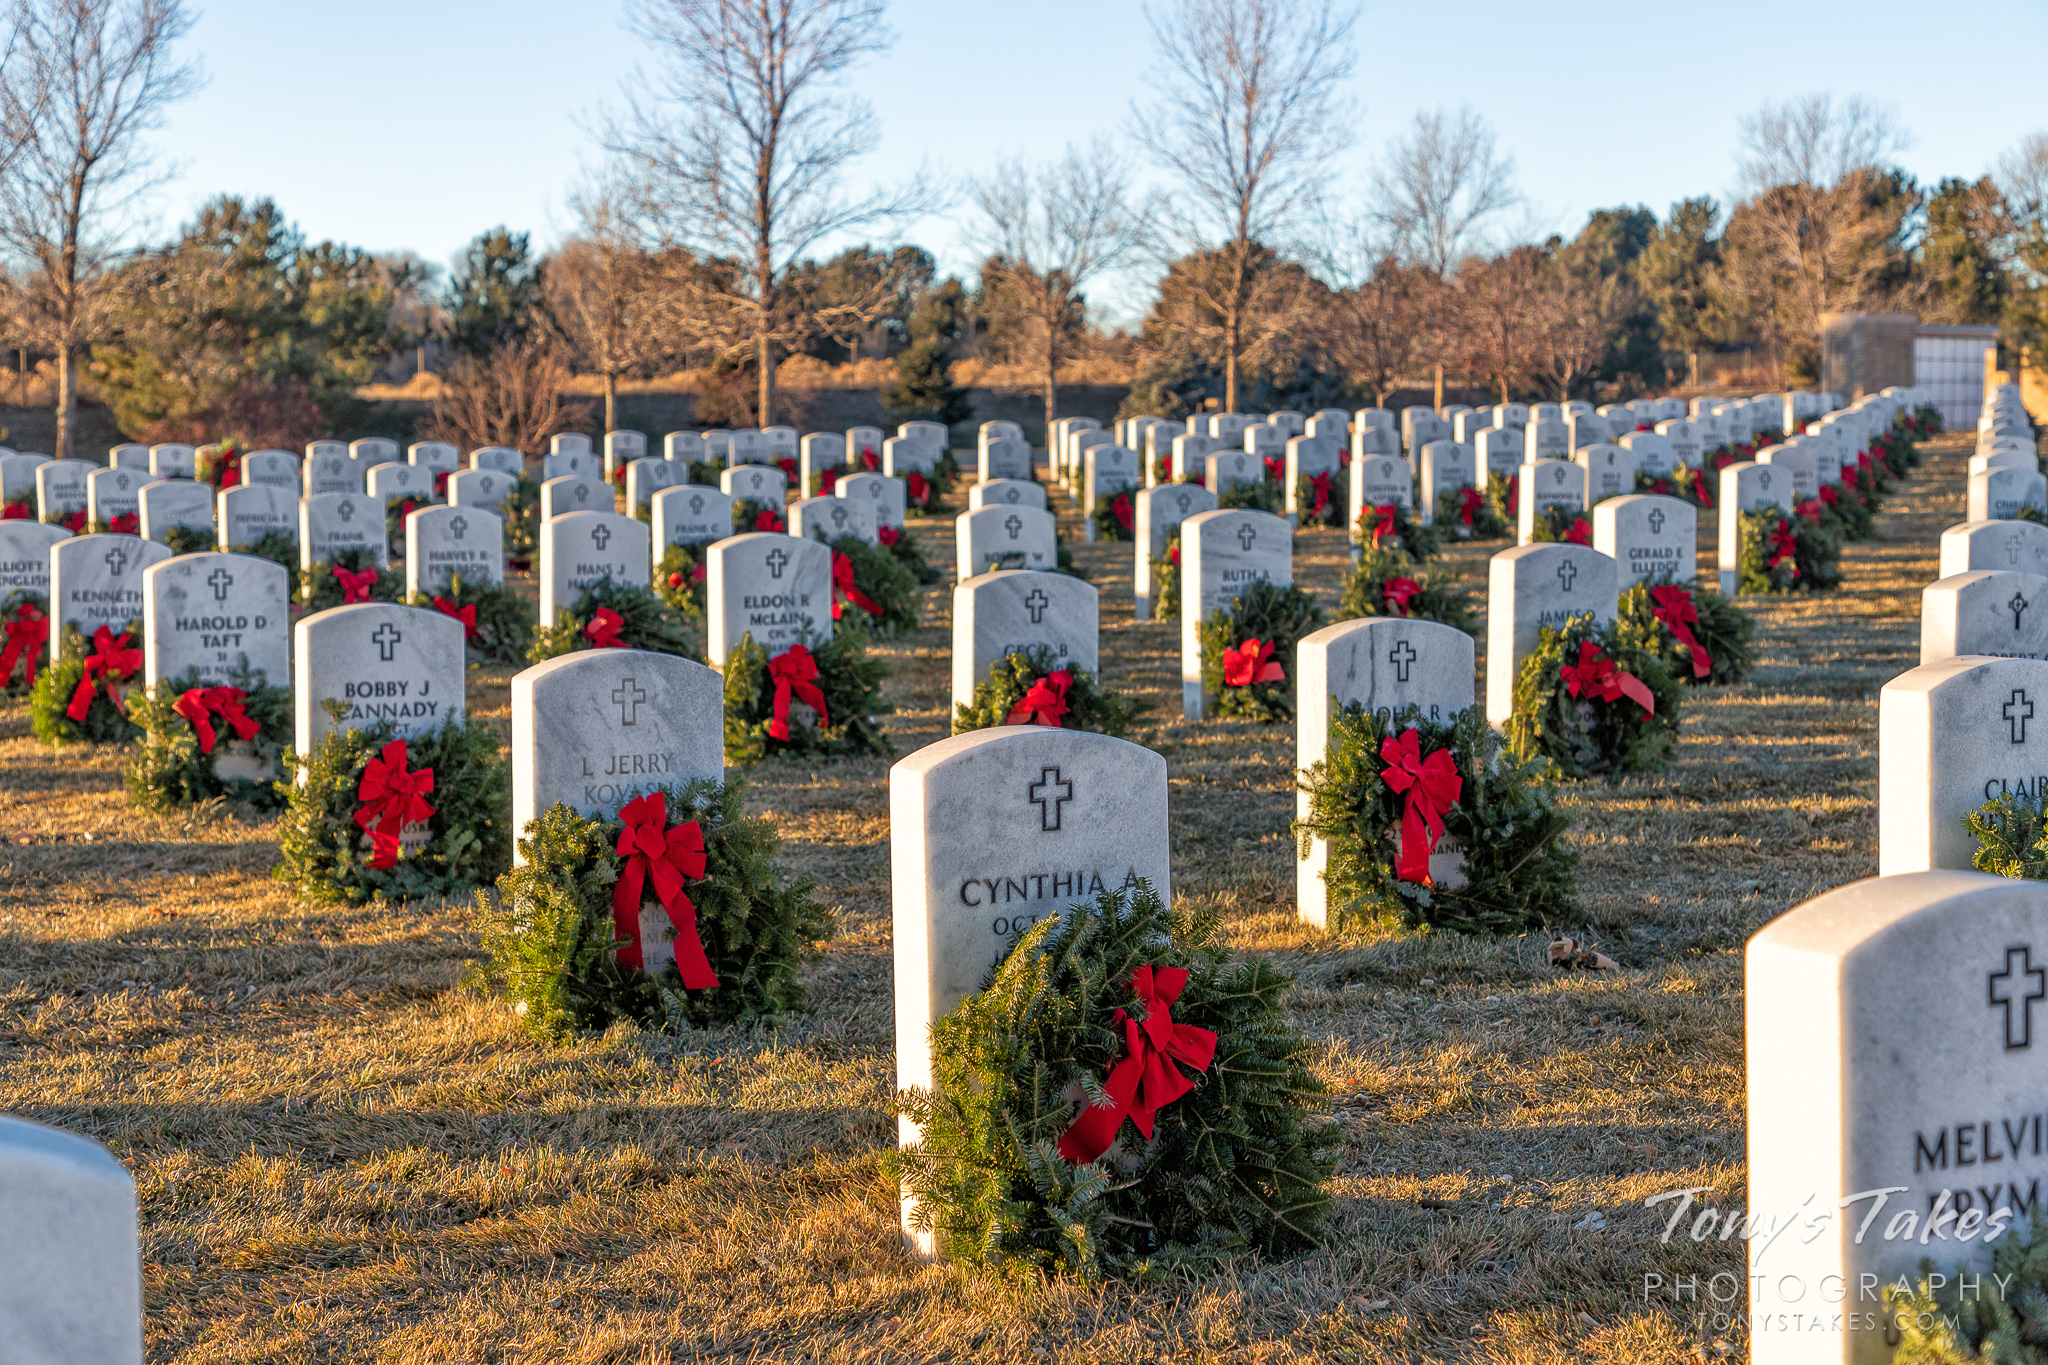 Wreaths adorn the graves of veterans at Fort Logan National Cemetery in Colorado. (© Tony’s Takes)